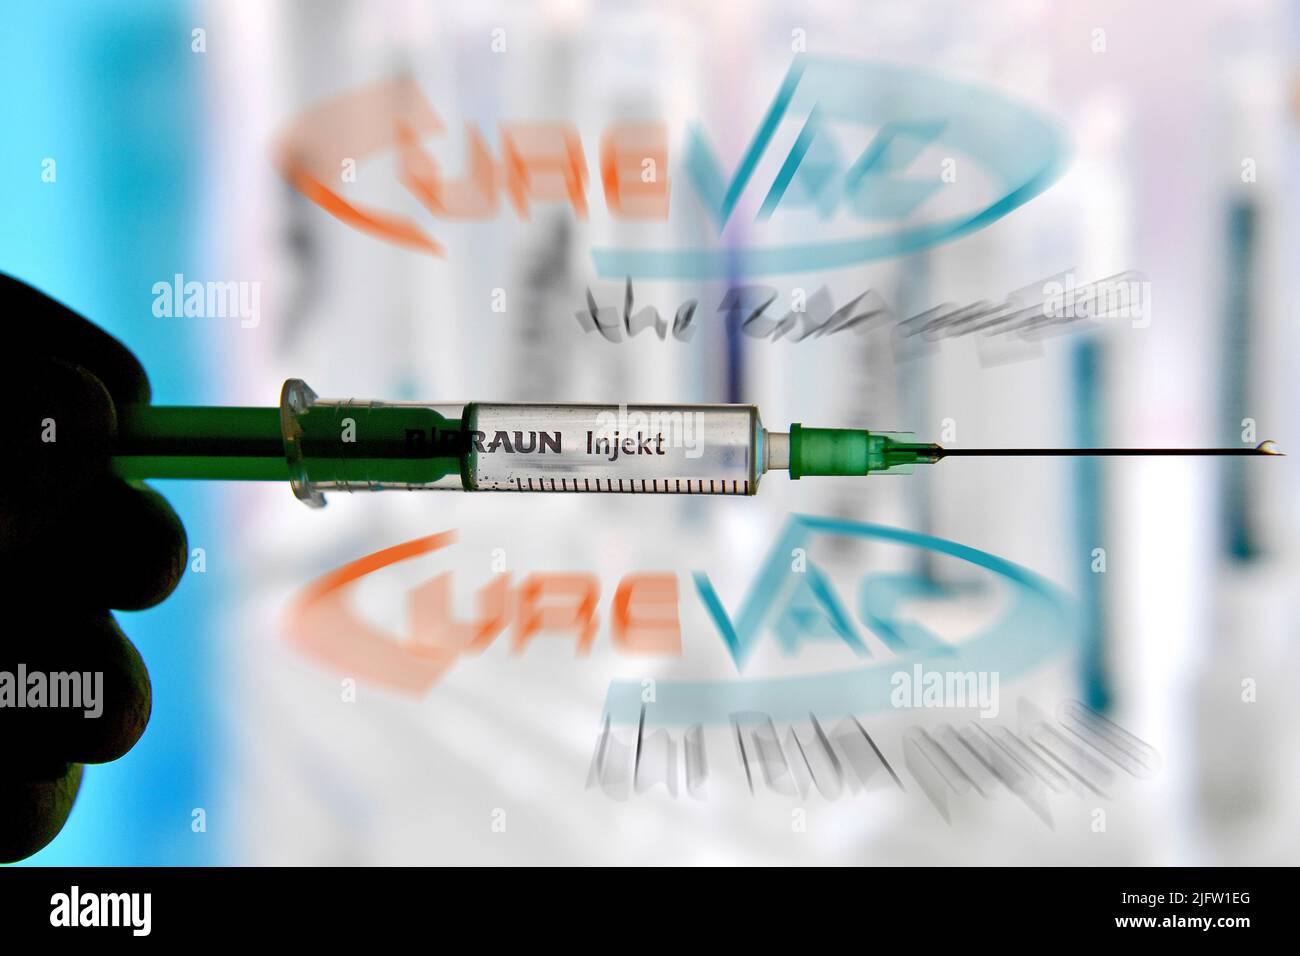 ARCHIVE PHOTO: Curevac sues Biontech. The European Medicines Agency (EMA) is testing the Corona vaccine from the Tuebingen manufacturer Curevac for approval. Topic image, symbolic photo: Corona vaccine. A hand encased in rubber gloves holds a disposable syringe with vaccine for injection with a cannula. Â Stock Photo